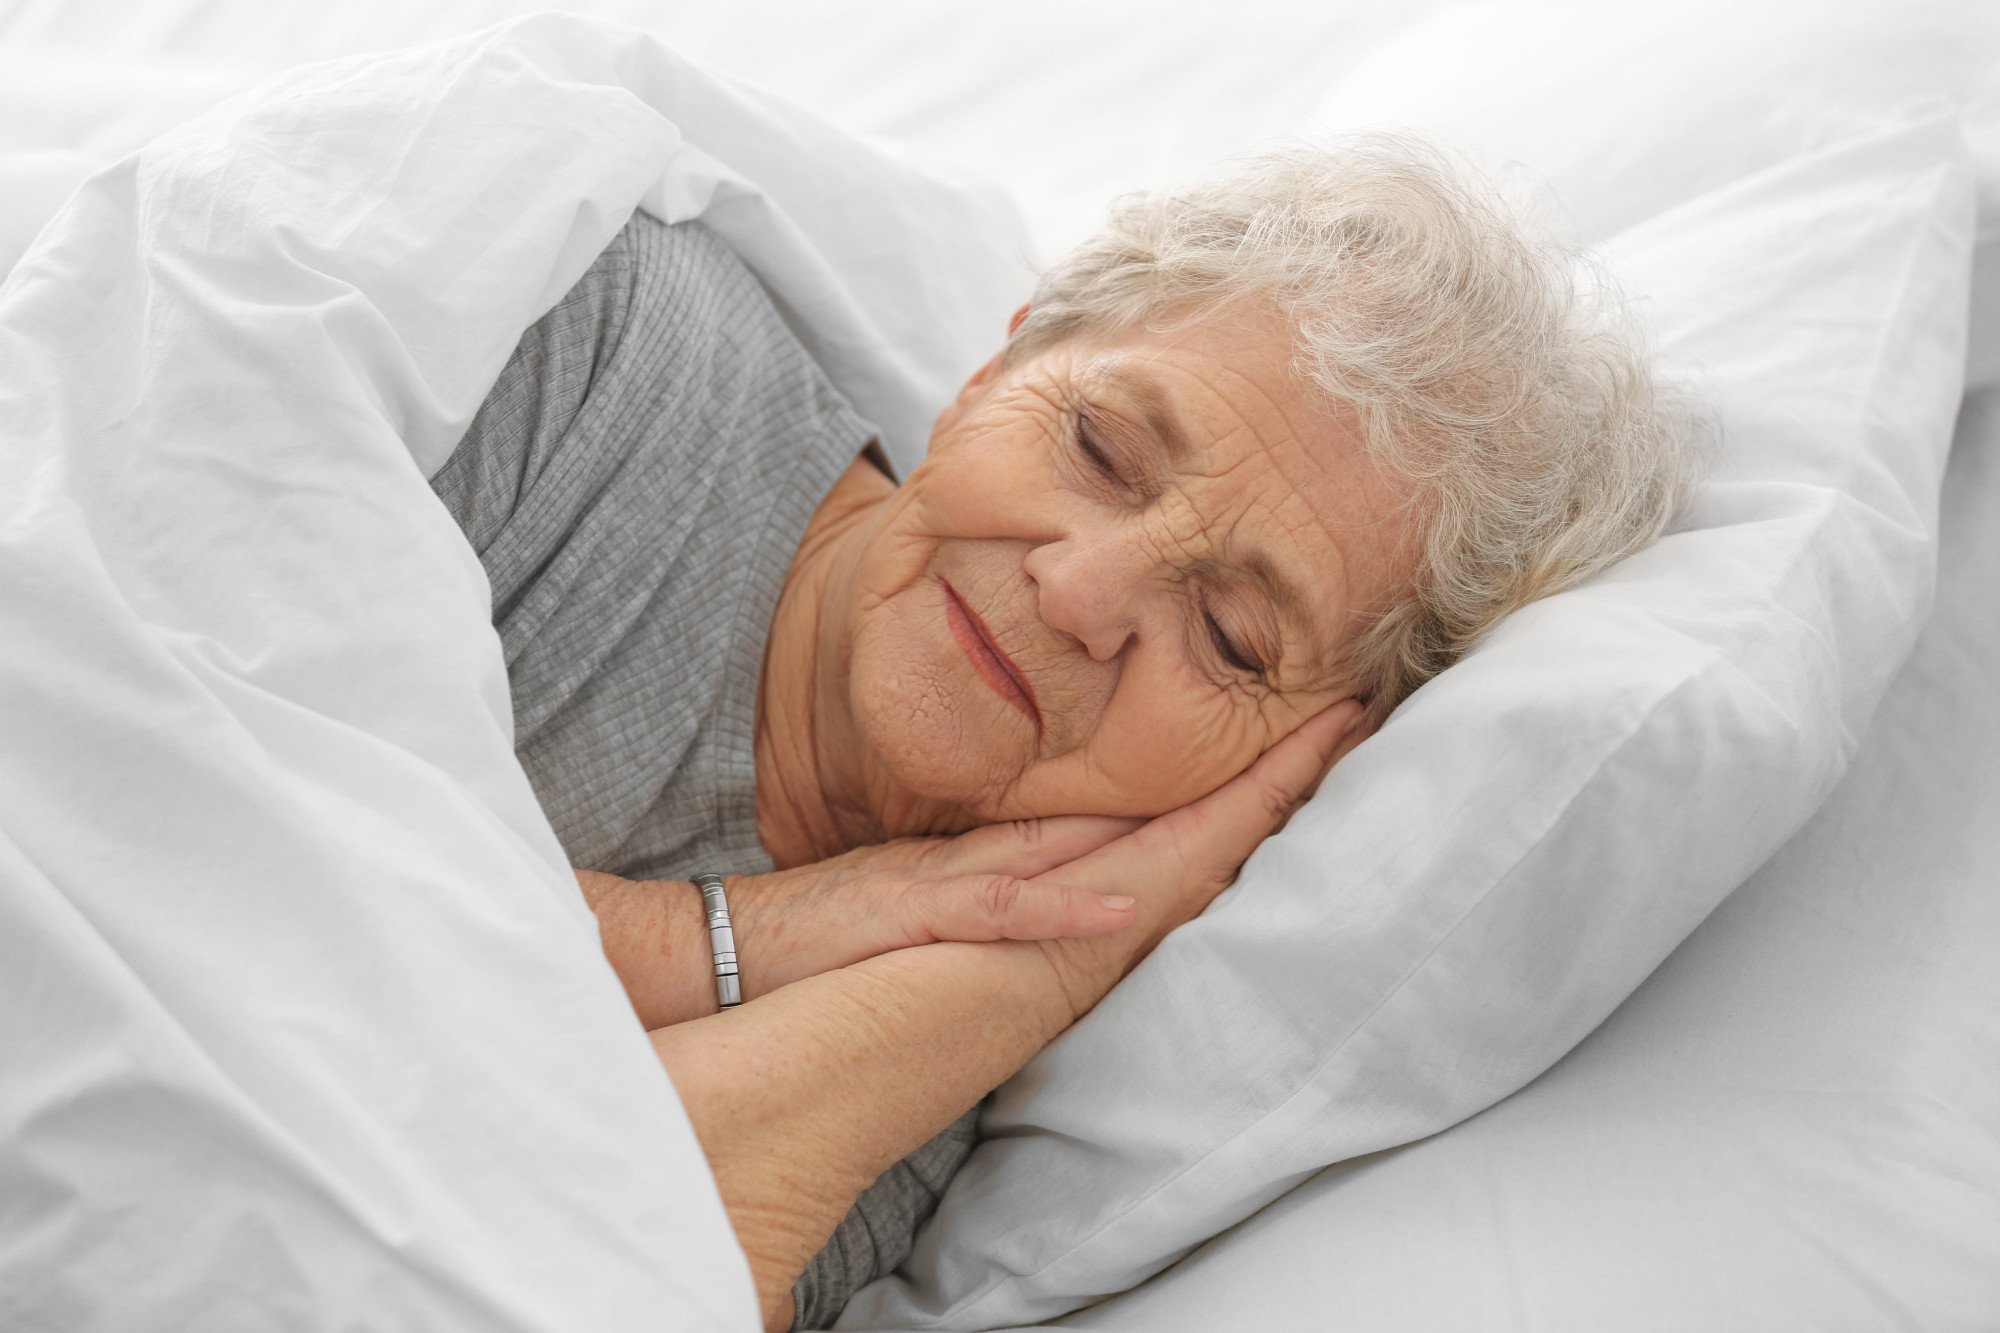 An elderly person sleeping a lot: why is it happening? You could be wondering about the cause, and if you should be concerned. This post will explain things.